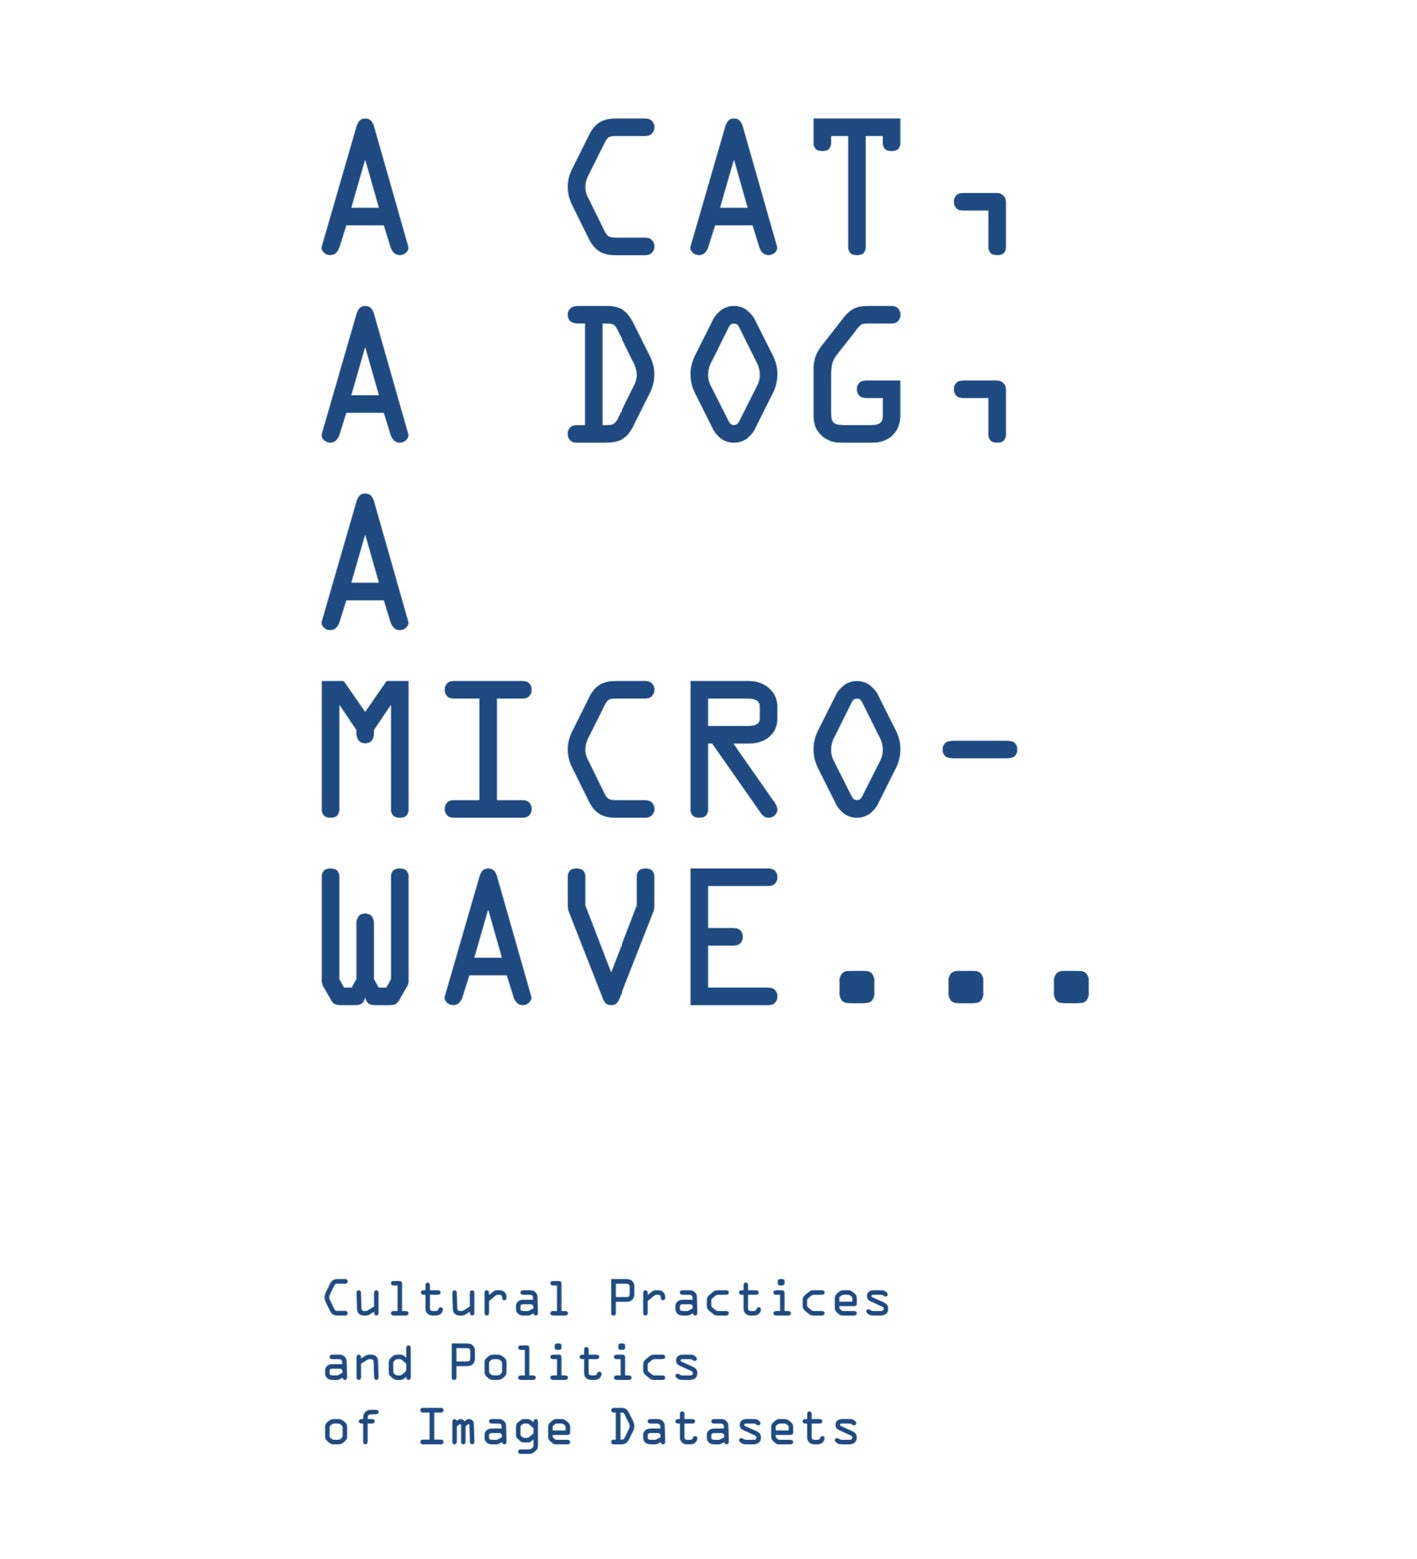 A Cat, A Dog, A Microwave... Cultural Practices and Politics of Image Datasets